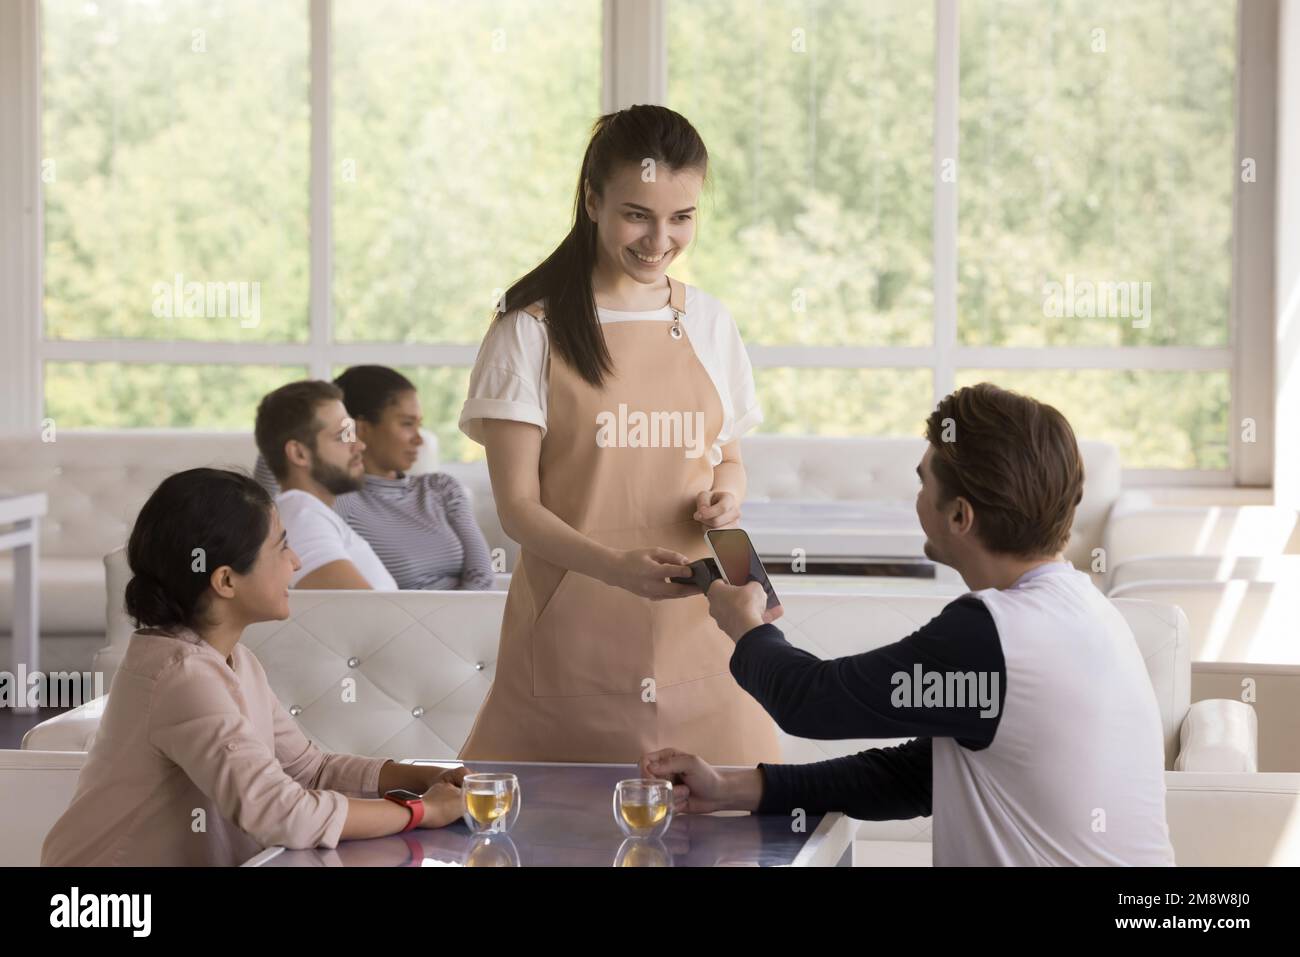 Cheerful young man and woman paying bill in cafe Stock Photo